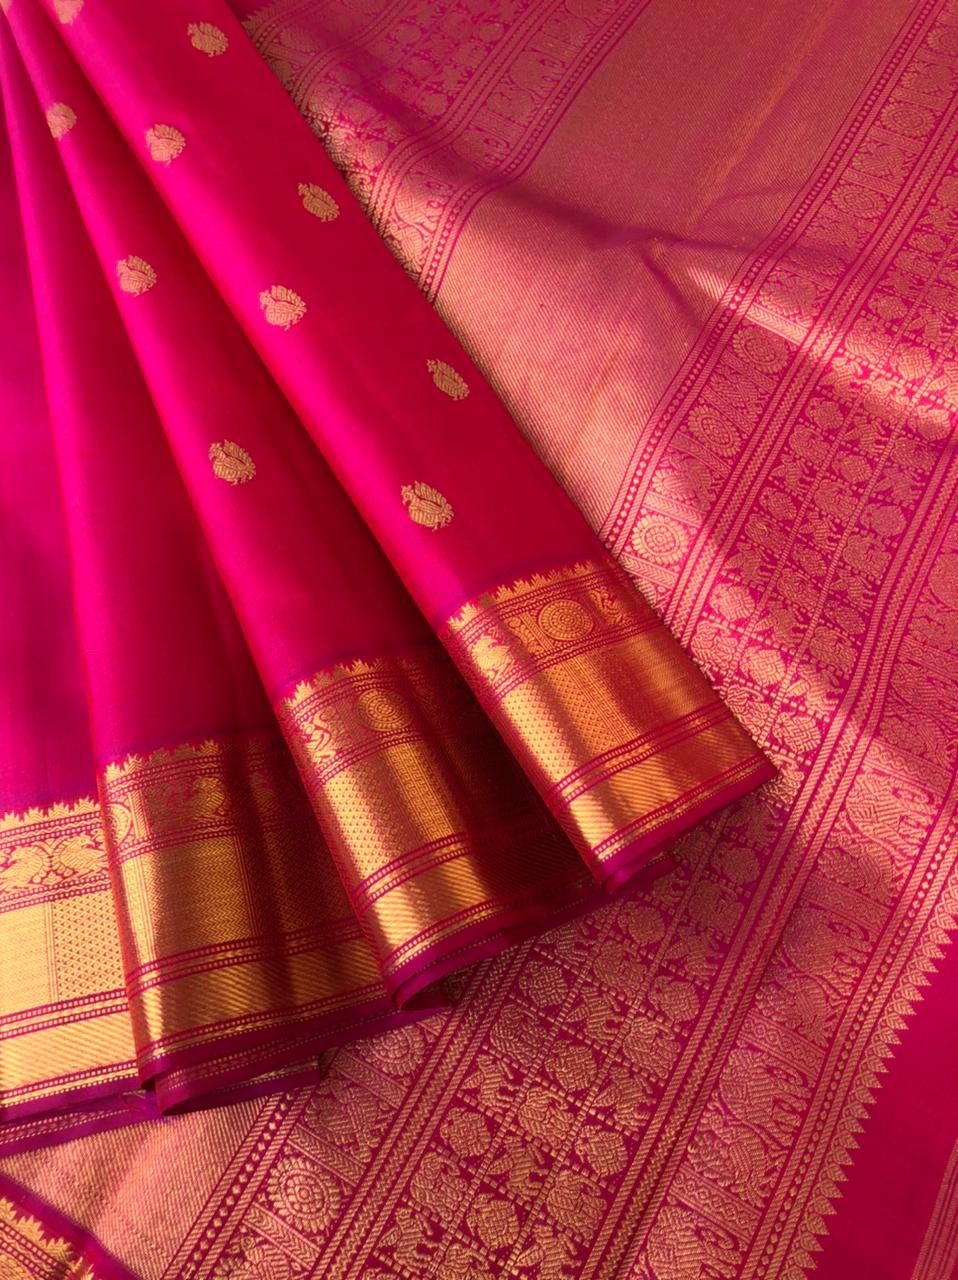 Swarnam - The lineage of Heirloom Kanchivaram - absolutely gorgeous traditional Kanchivaram pink and pure gold is the best